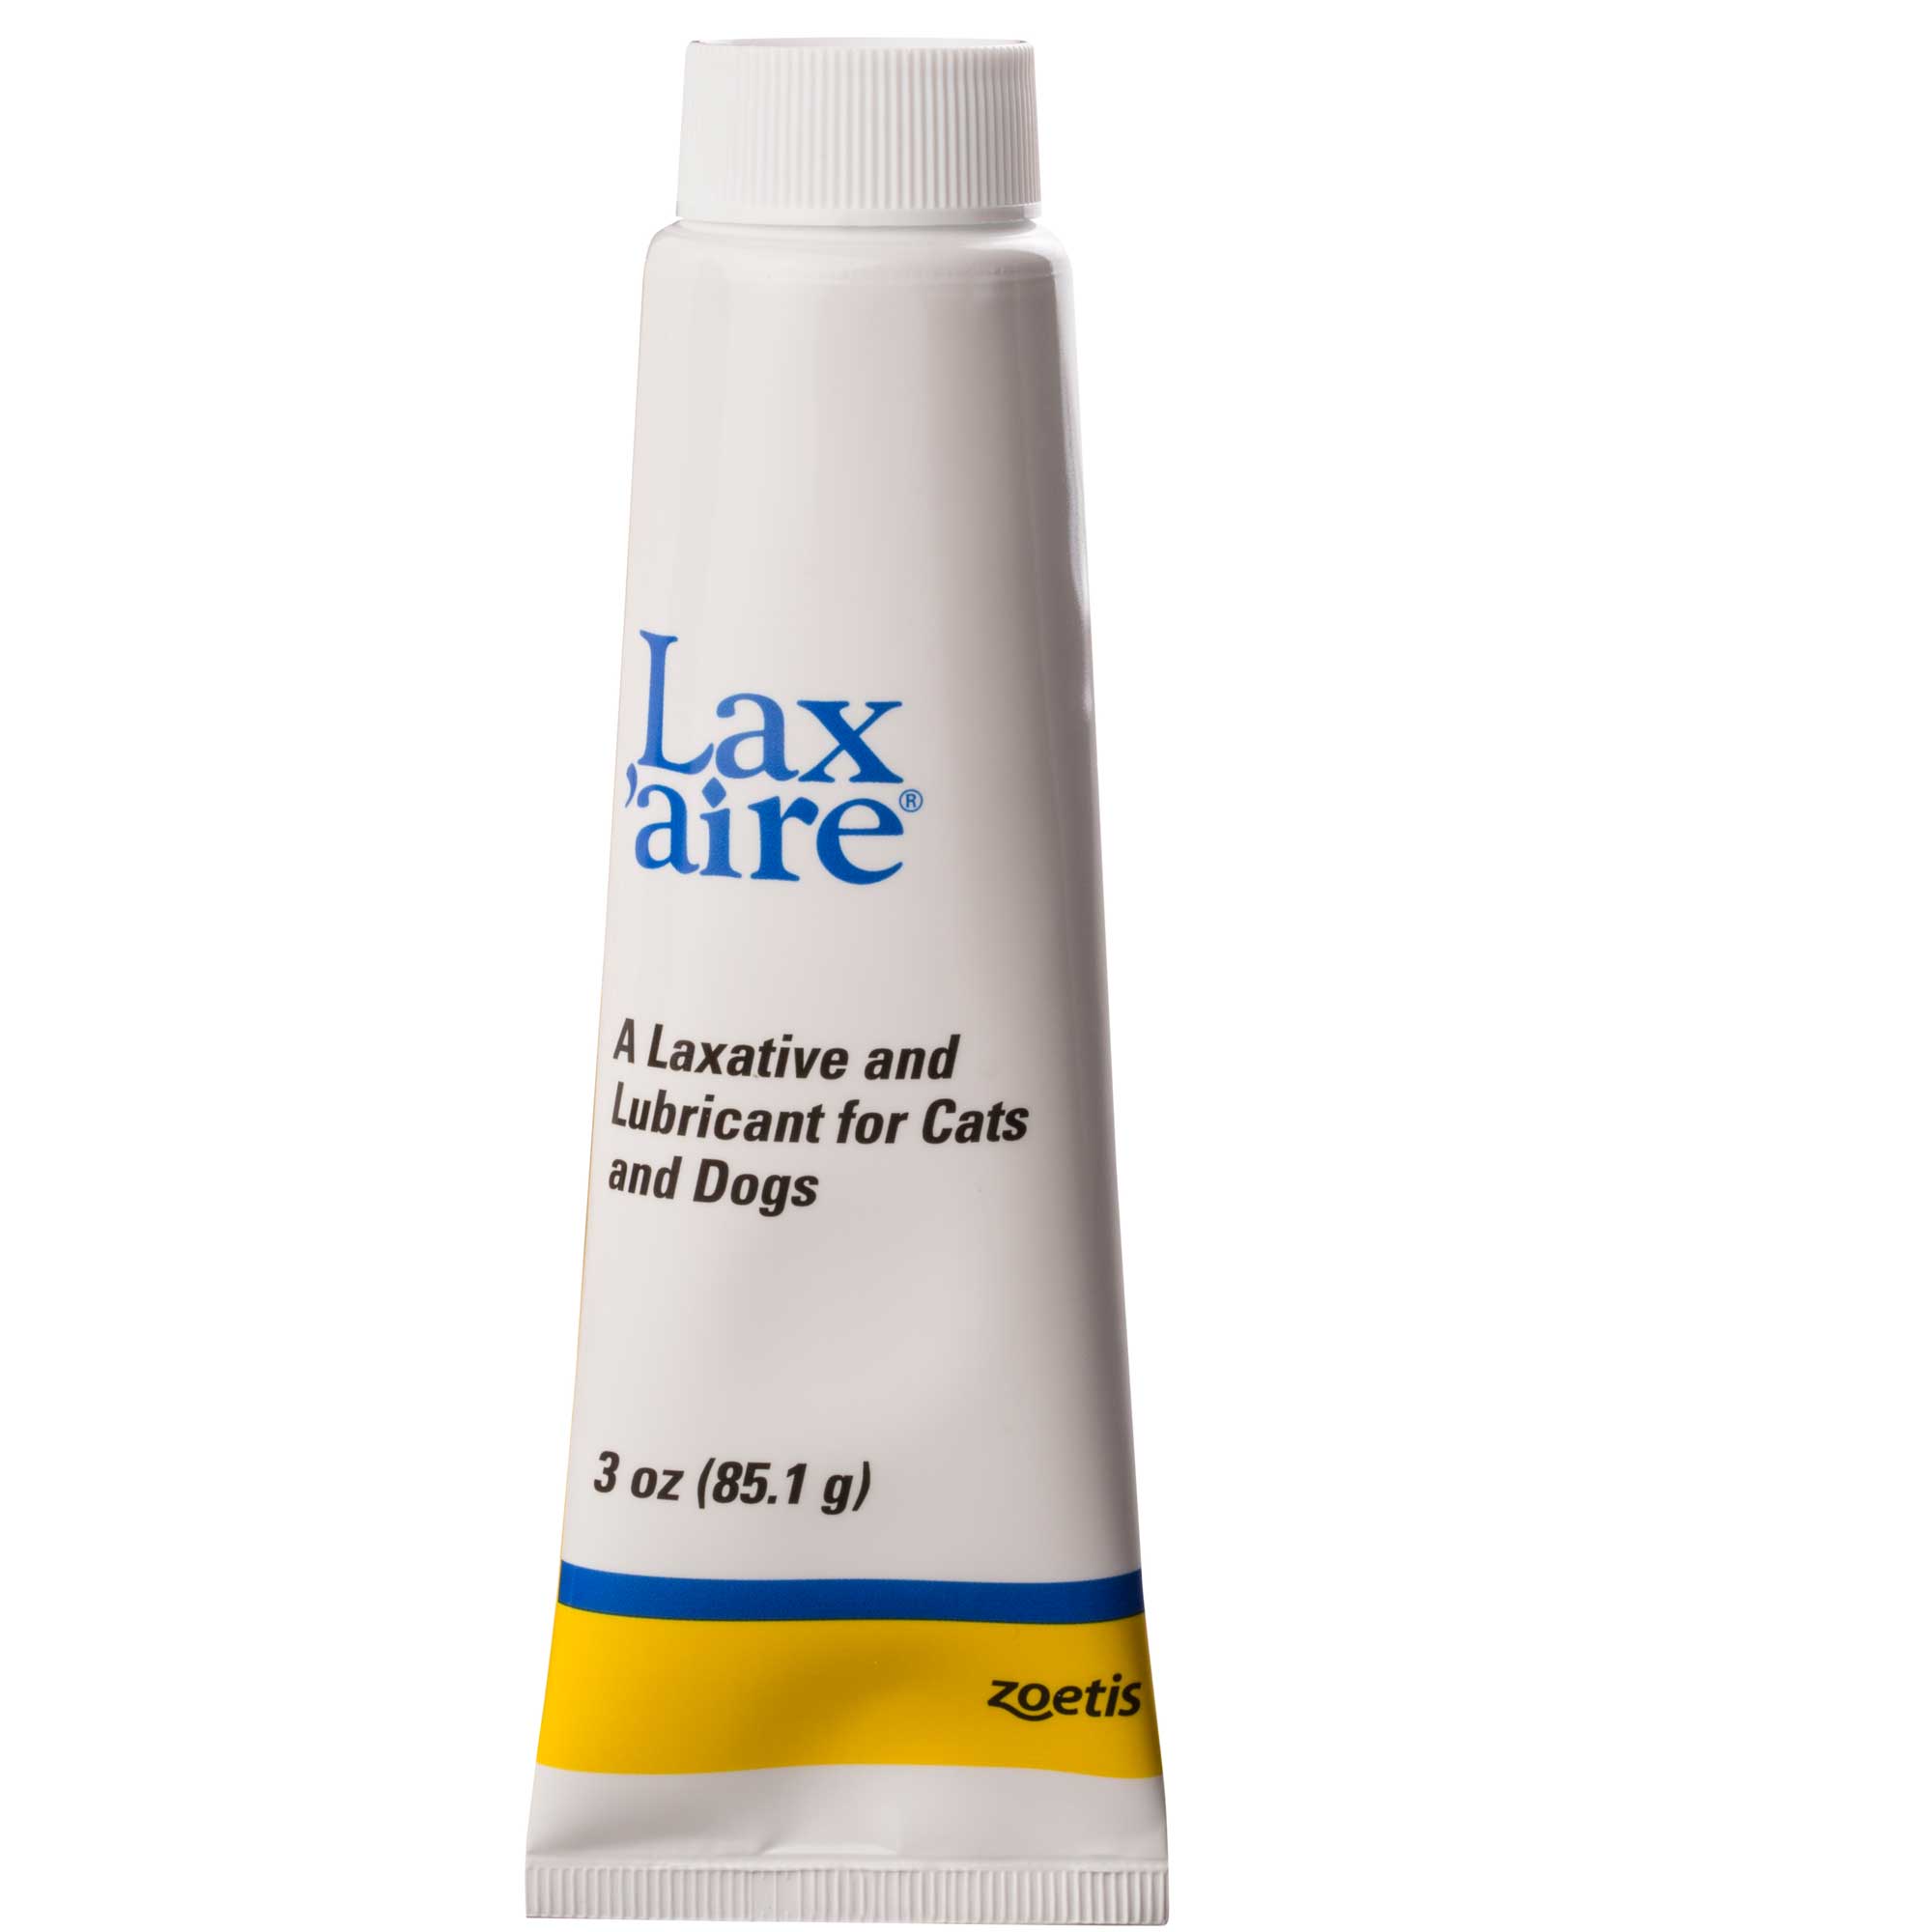 Lax'aire for Dogs and Cats - 1800PetMeds